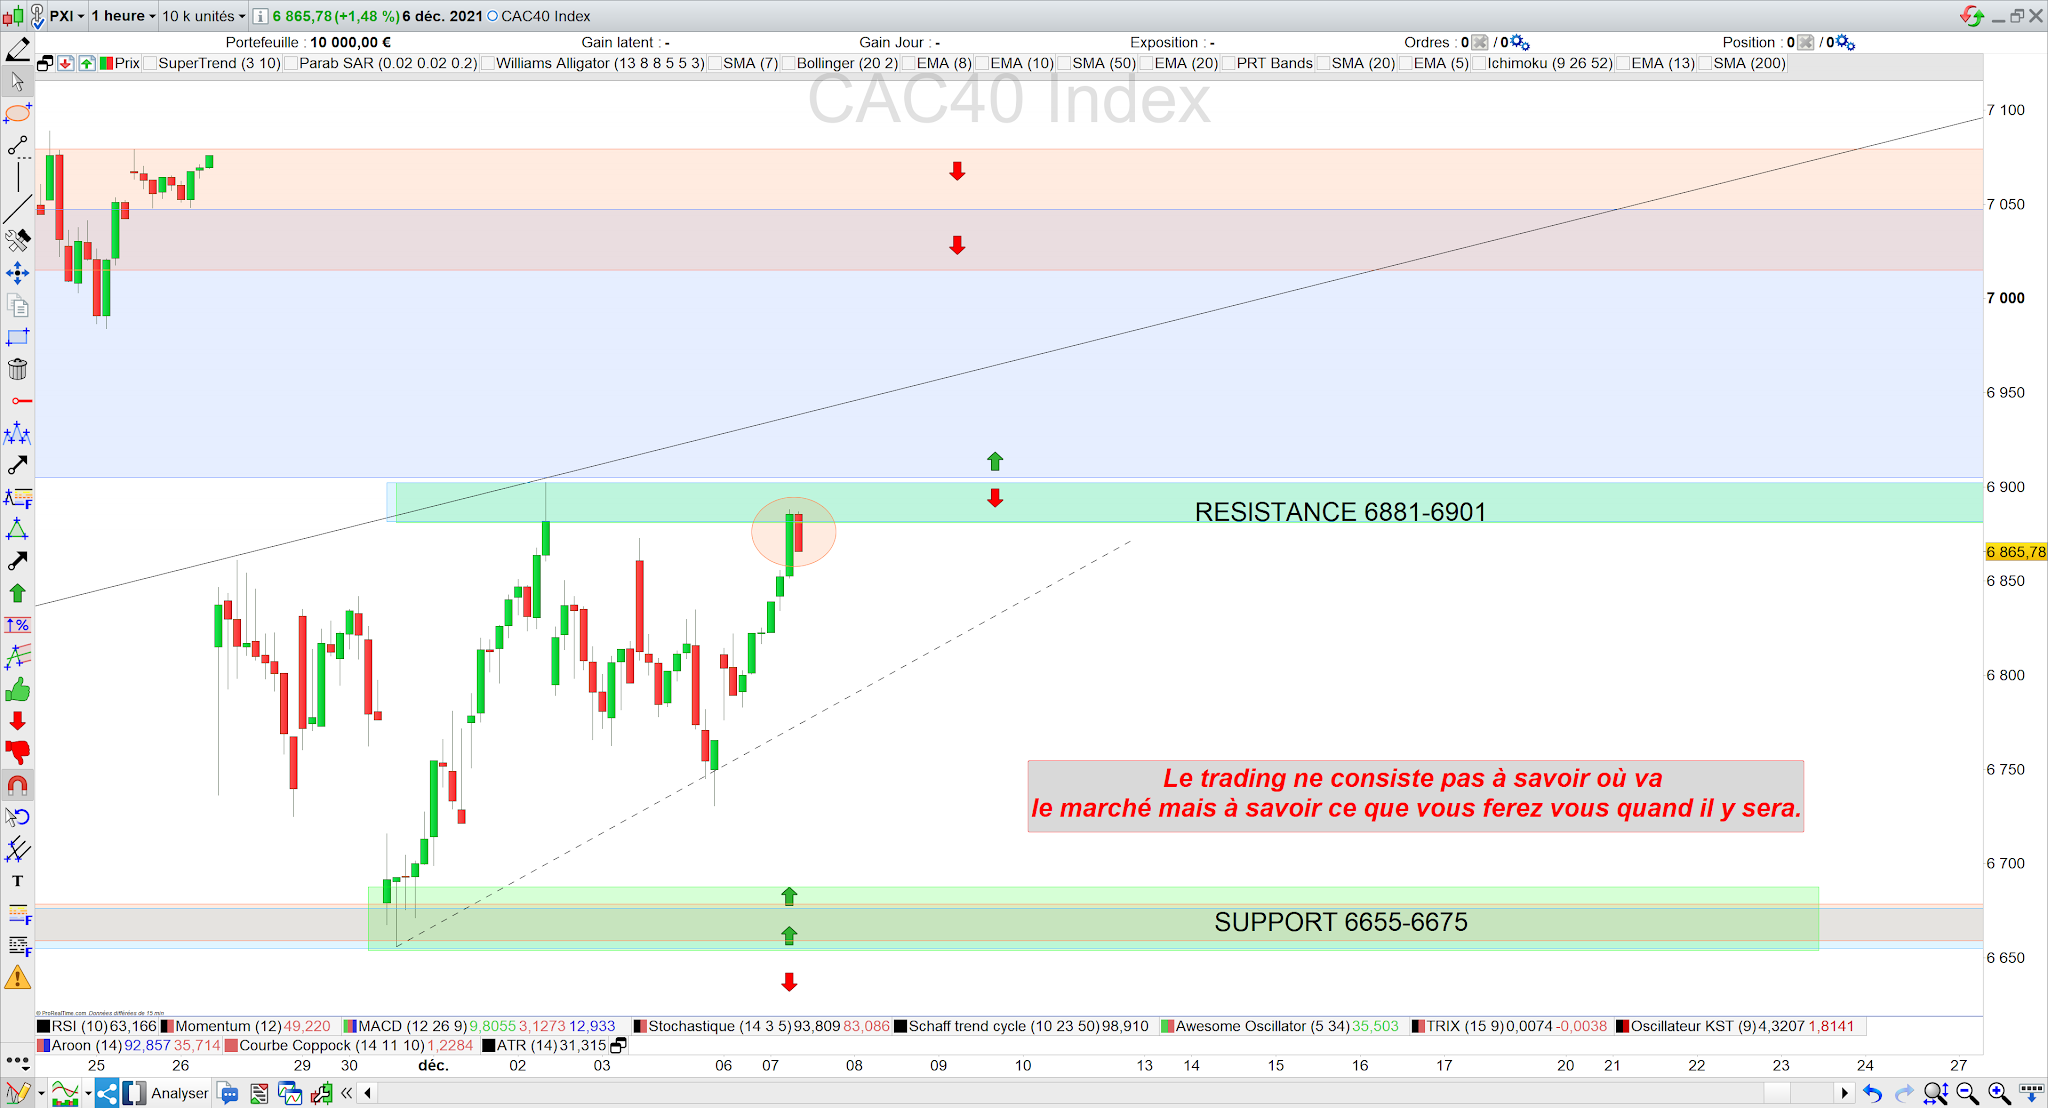 Trading cac40 7/12/21